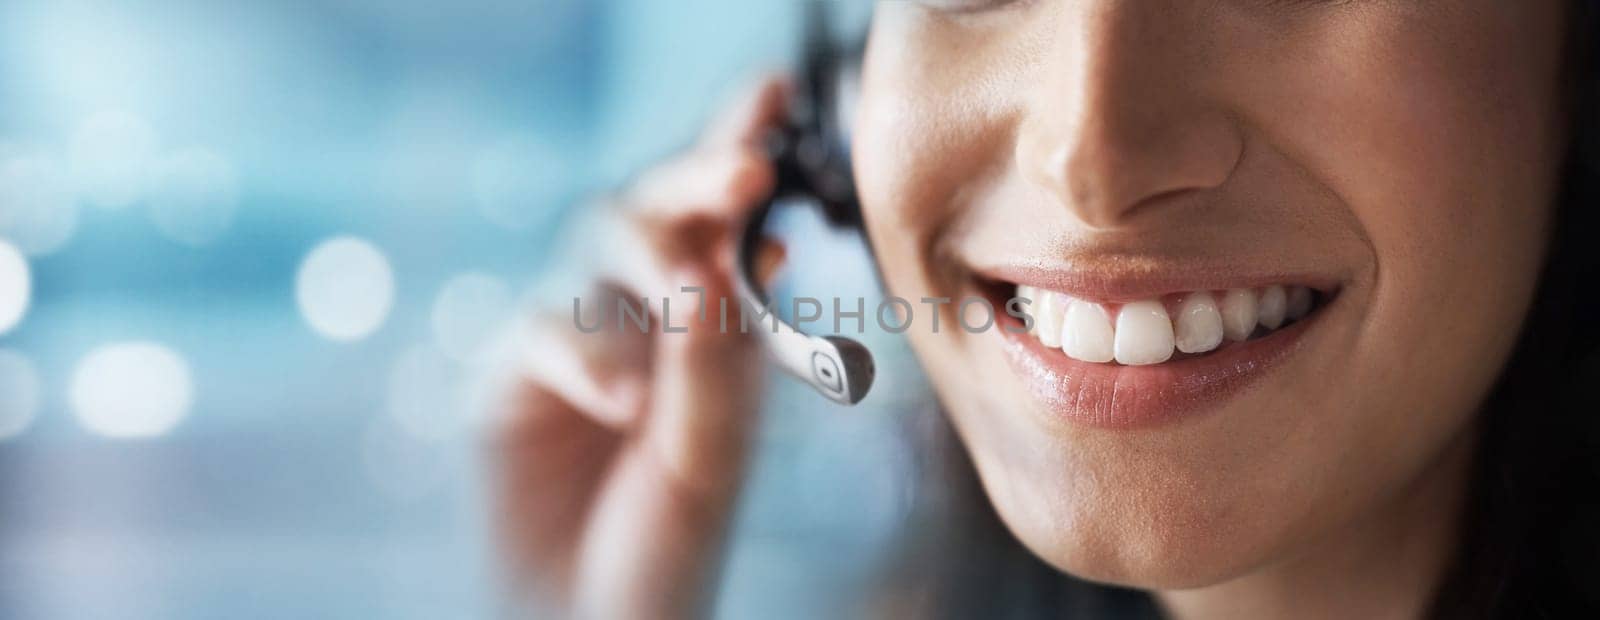 Microphone, mockup or happy consultant in call center helping, talking or networking online. Mouth zoom, woman or insurance agent in communication smiles with pride at customer services or sales job.